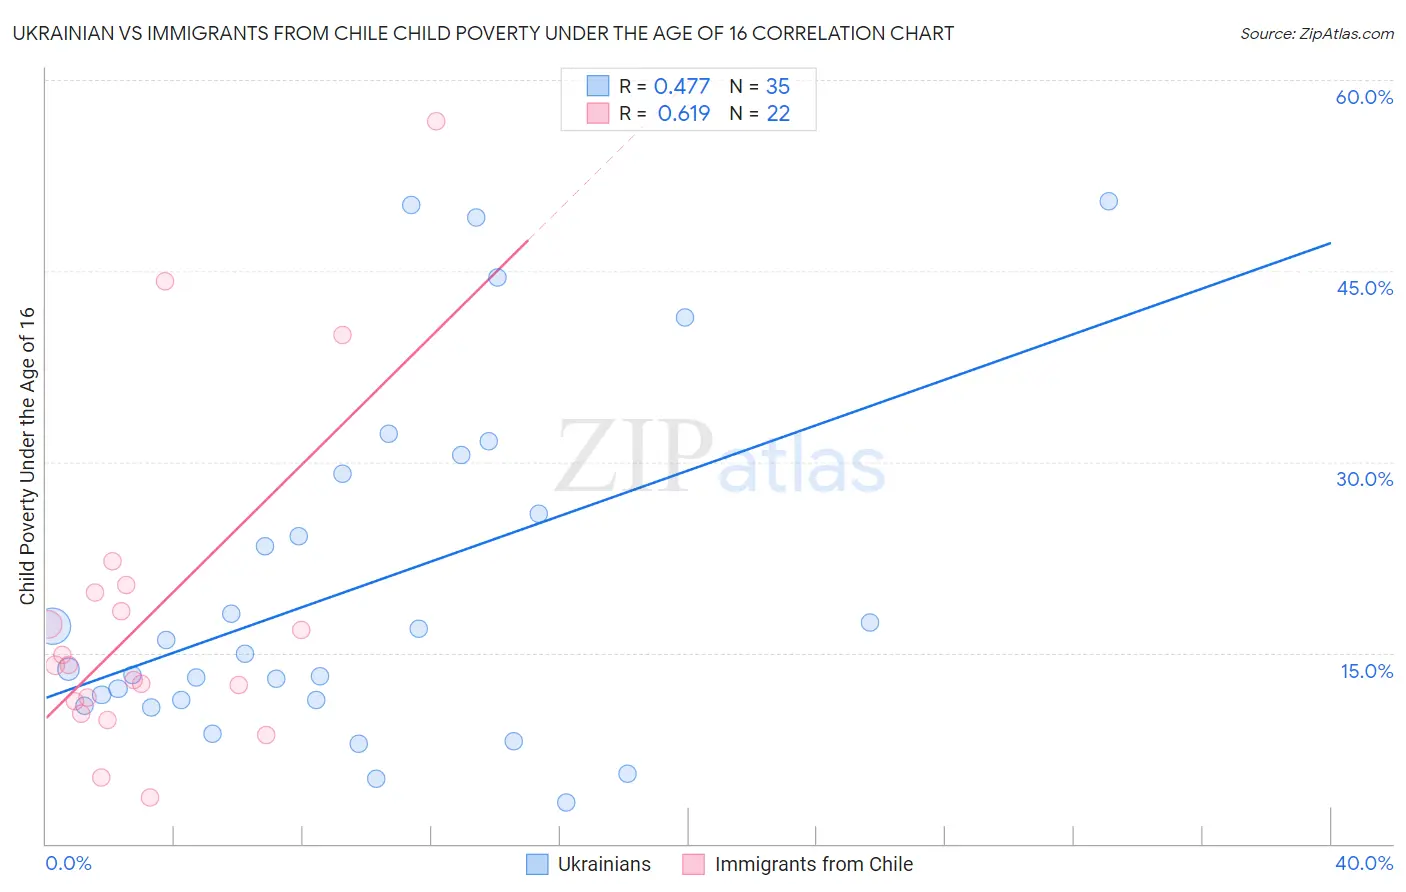 Ukrainian vs Immigrants from Chile Child Poverty Under the Age of 16